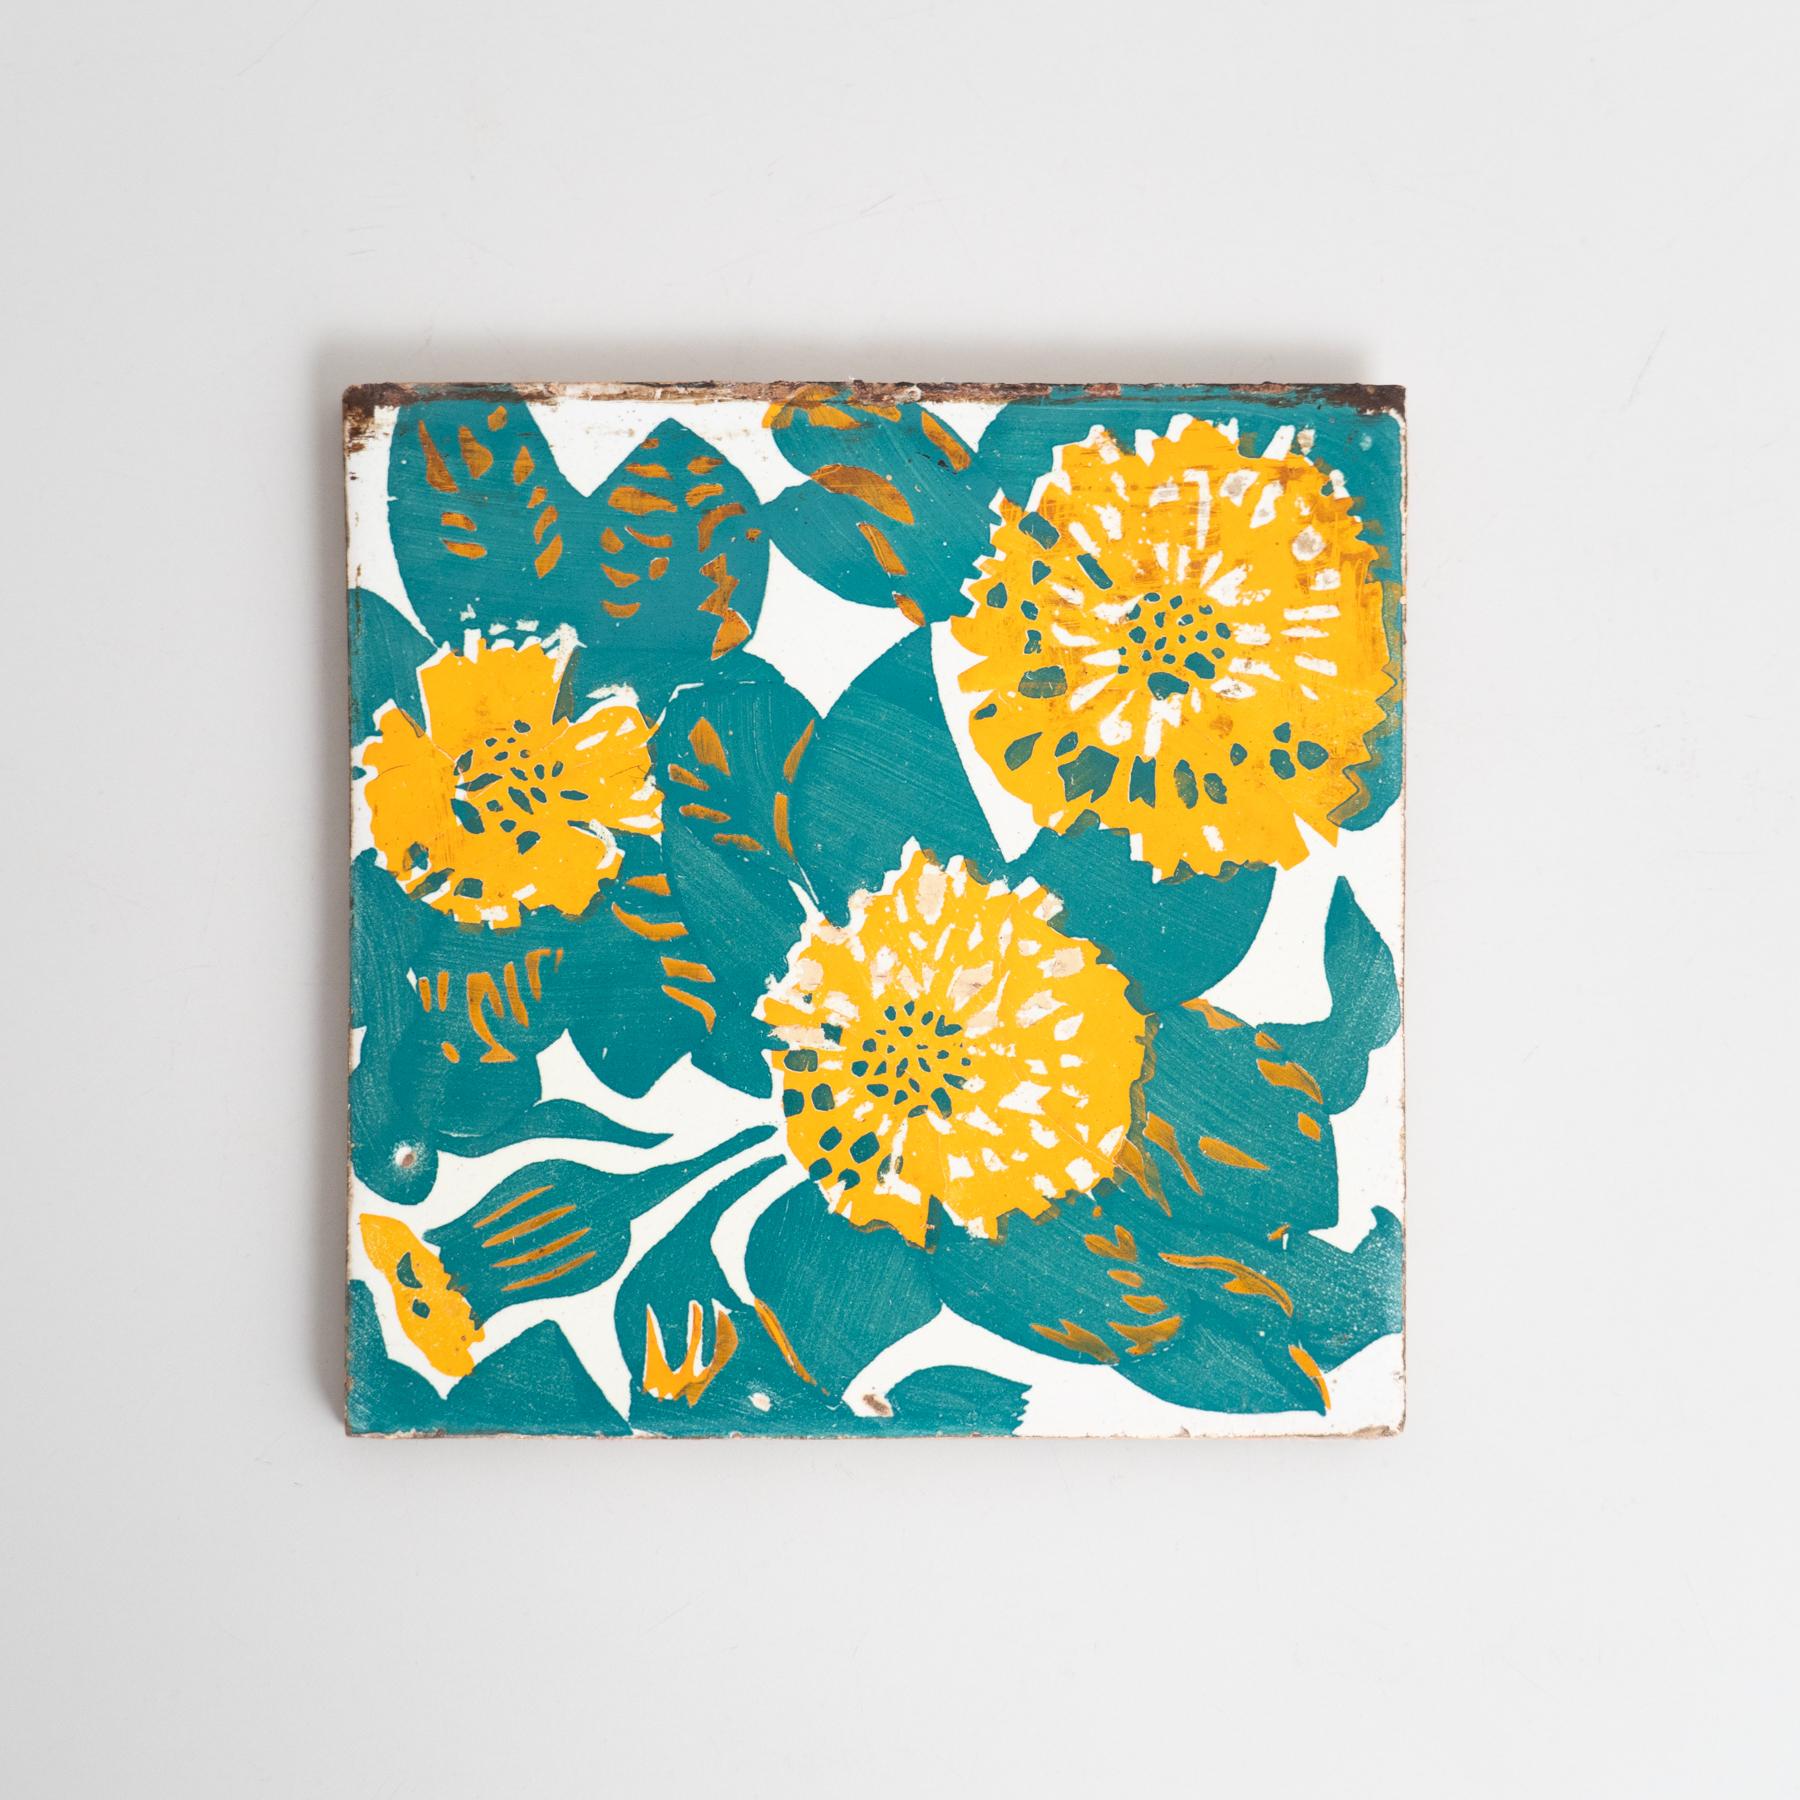 Decorative ceramic tile by Antoni Gaudi, inspired by the marigold and dianthus motifs on the decorative ceramic tiles he designed for the facade of Casa Vicens, which constitute some of its most iconic features.

In good original condition, with